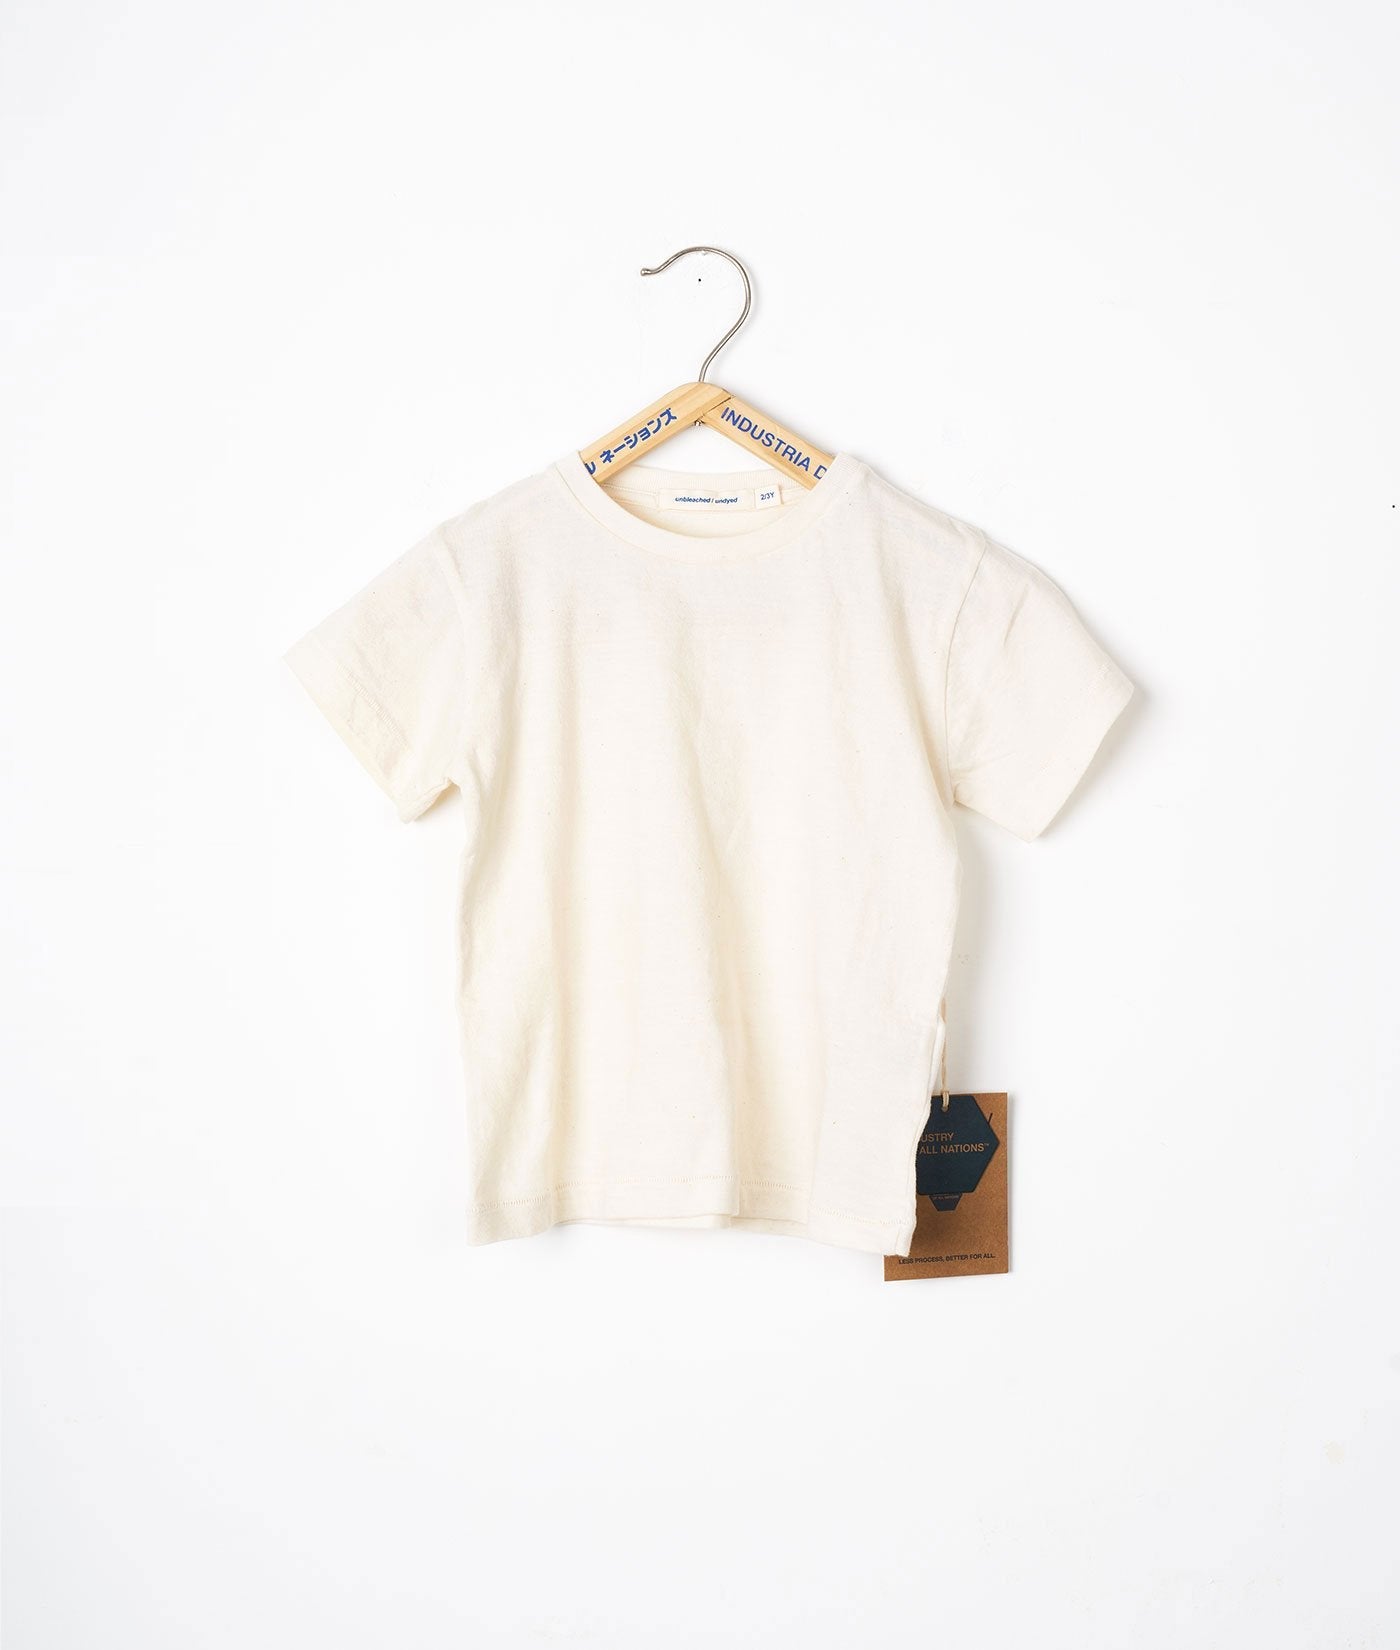 Industry of All Nations Kids Clean T-Shirt, Undyed